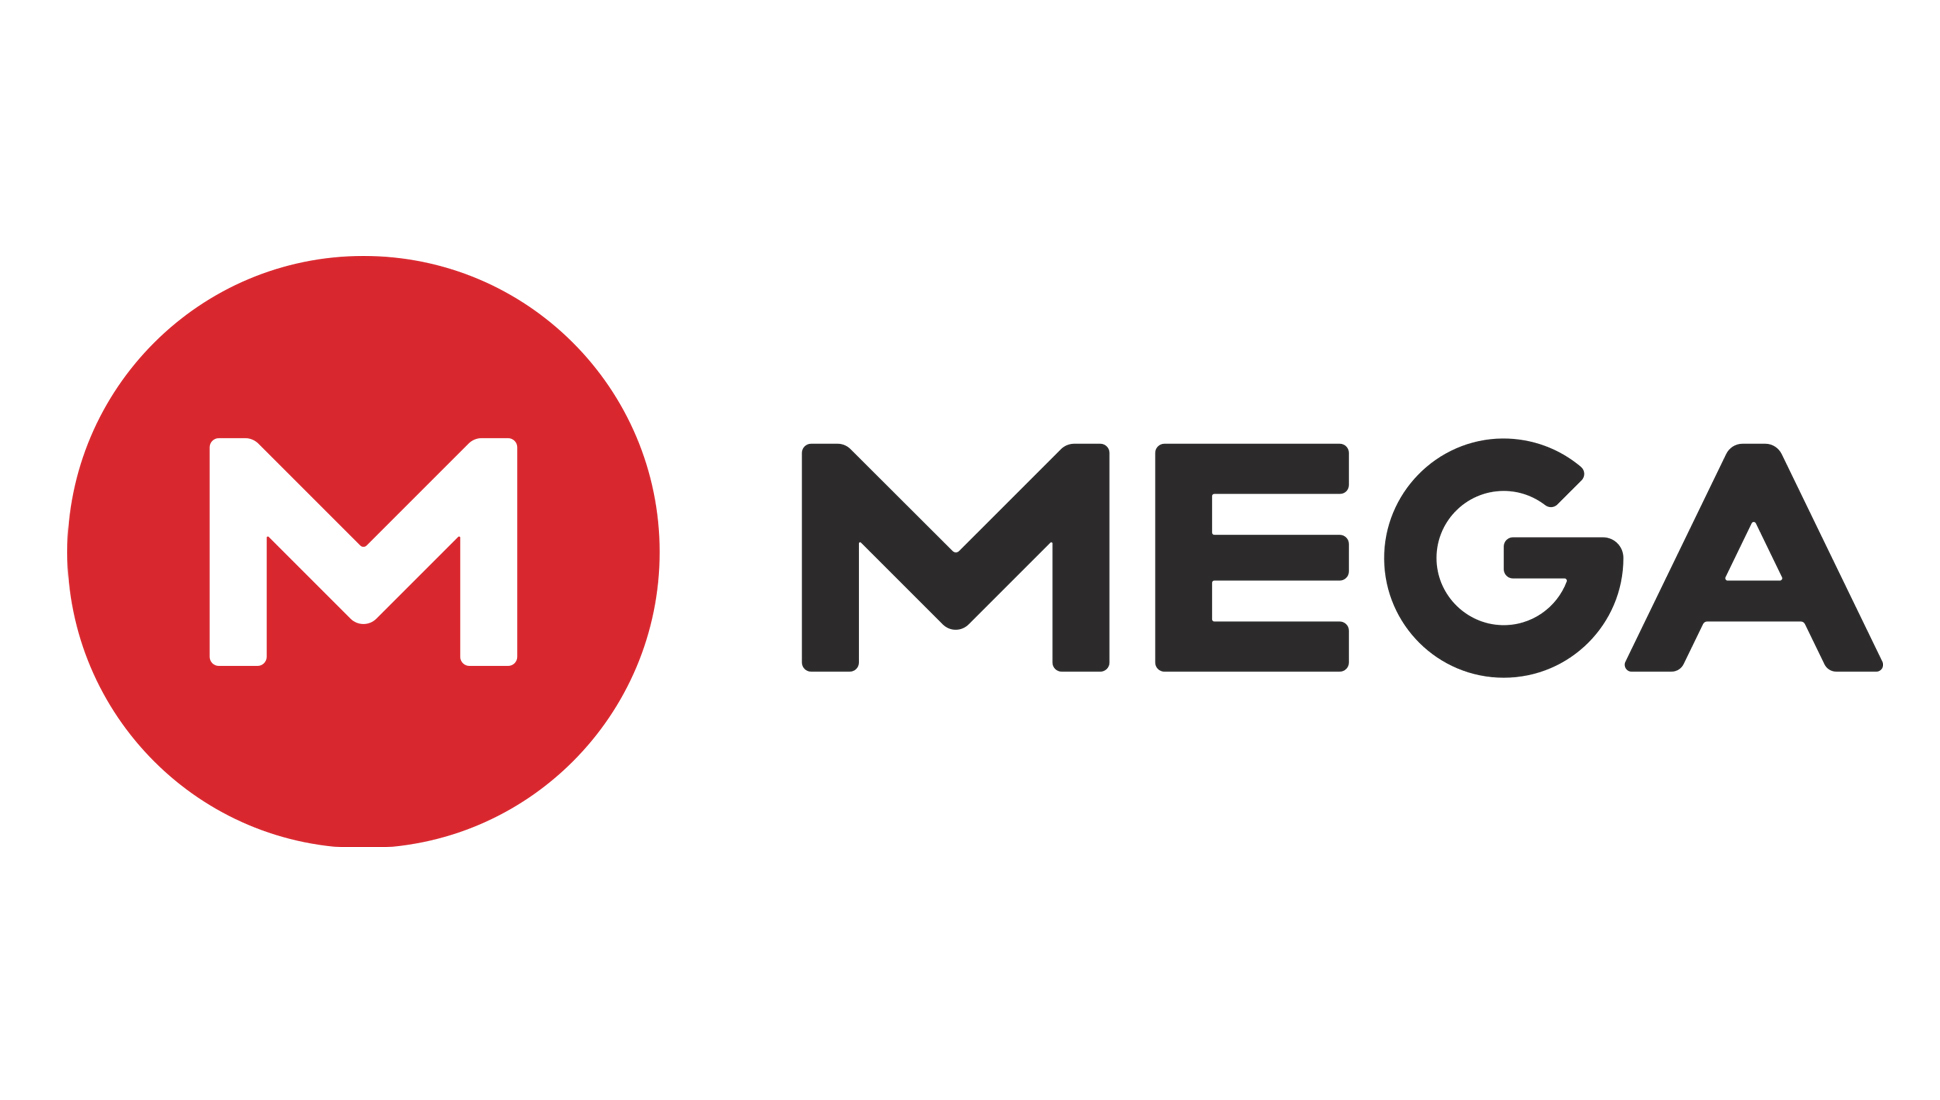 How To Download Mega Files Without Mega